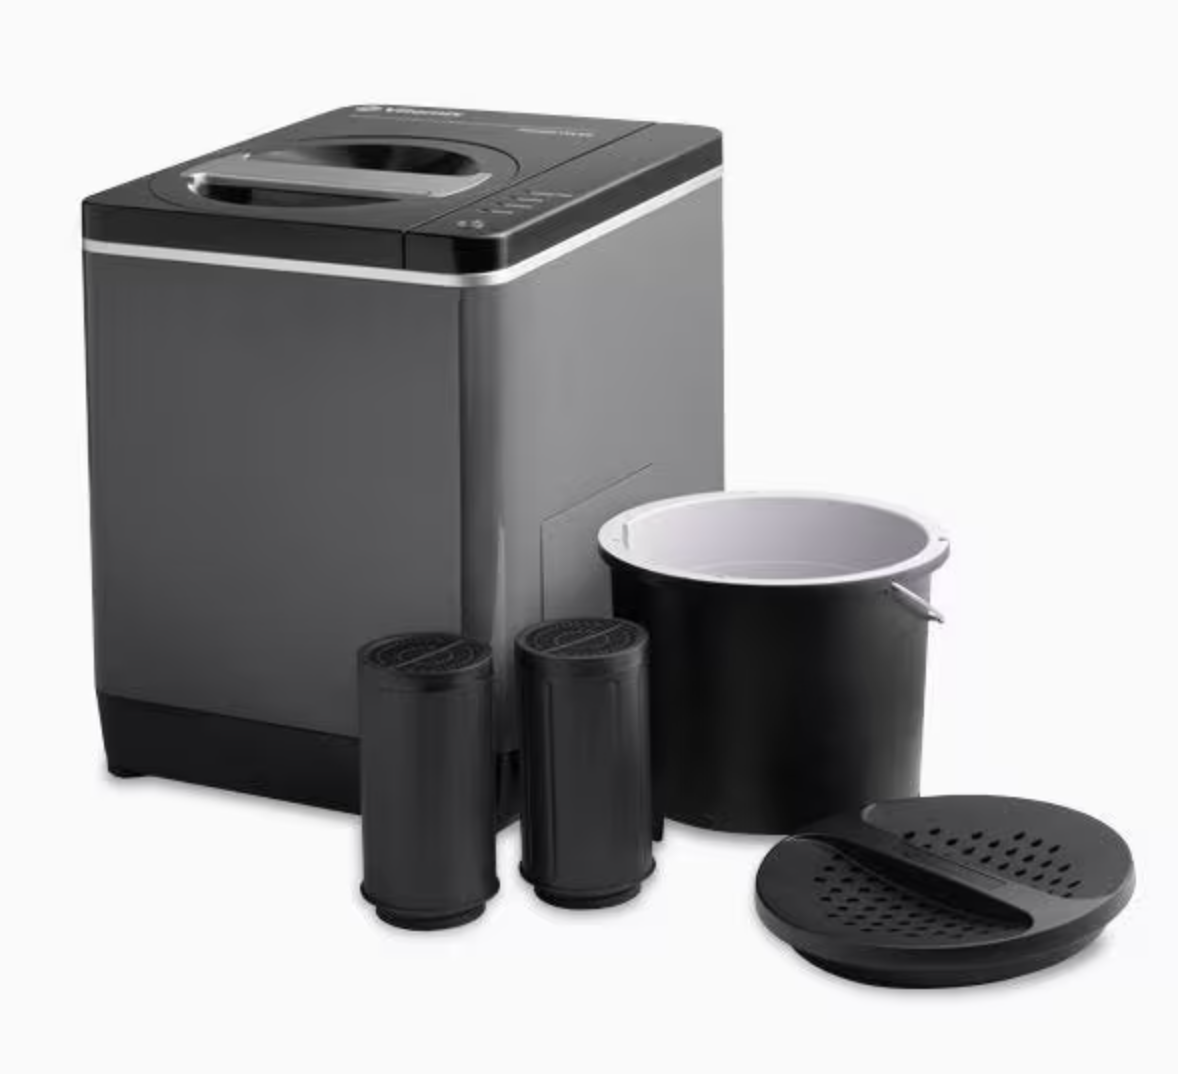 Vitamix FoodCycler FC-50 Composter $299.95 + Free Shipping